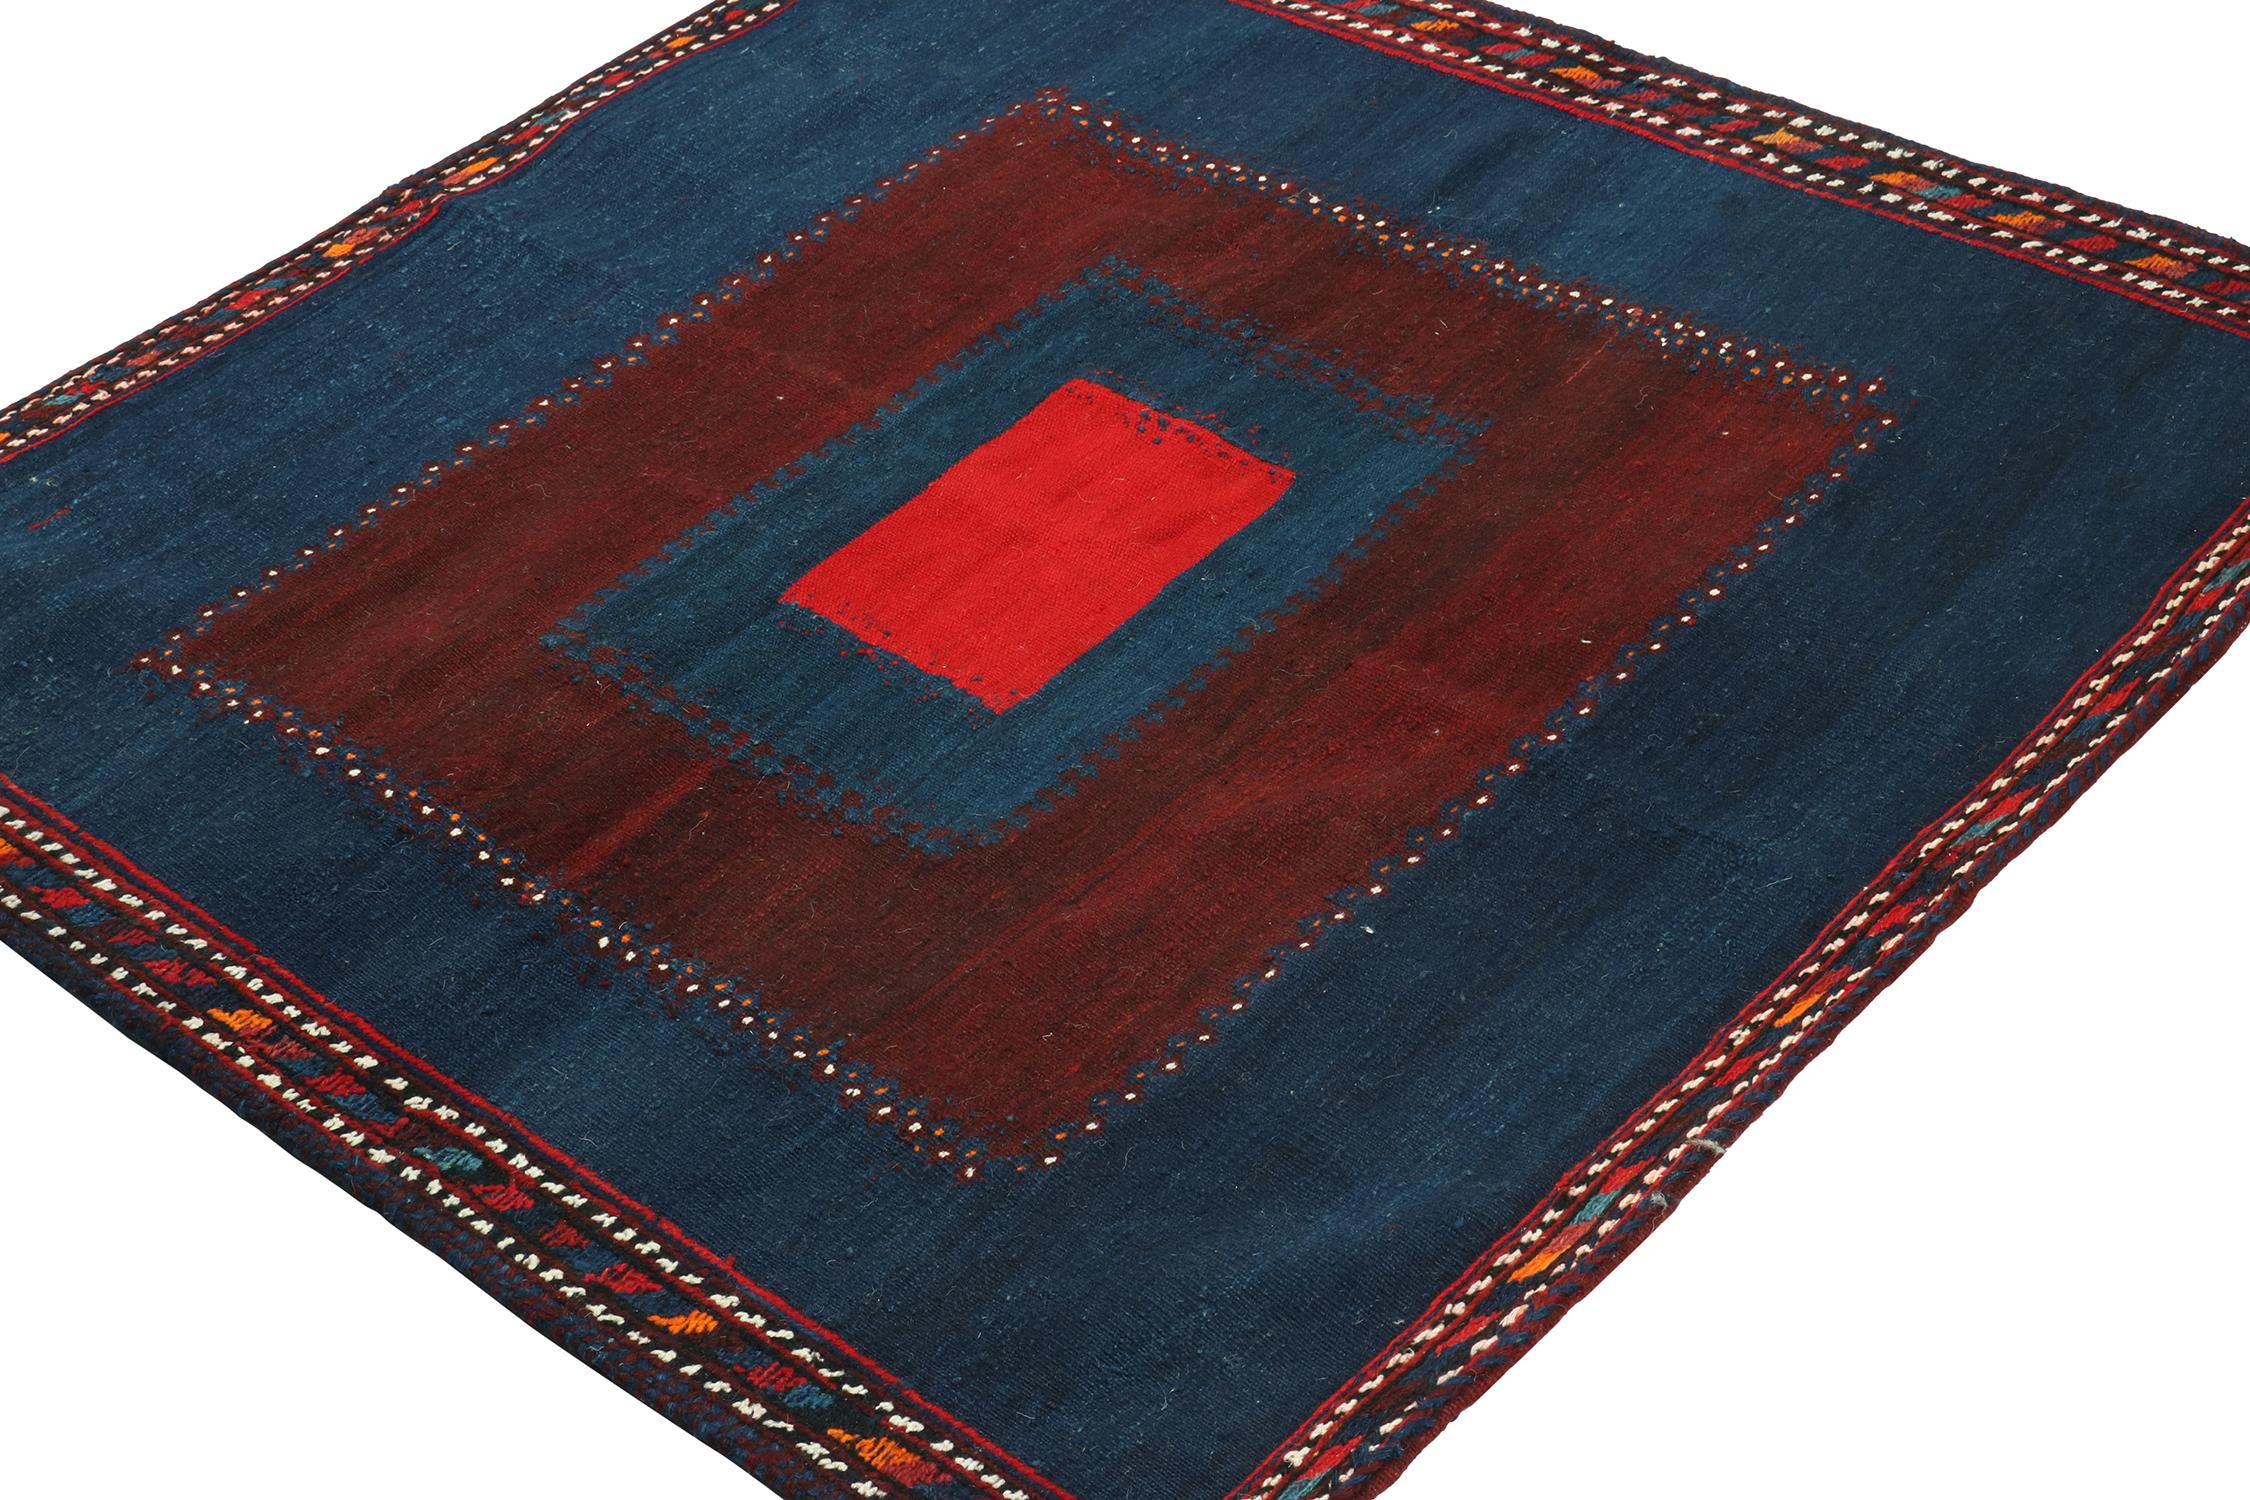 This vintage 4x4 square Persian kilim is a tribal Sofreh rug—handwoven in wool circa 1970-1980.

Further on the Design:

Sofreh Kilims like this piece are known for their minimalist patterns with vibrant colors and durable bodies. This piece enjoys